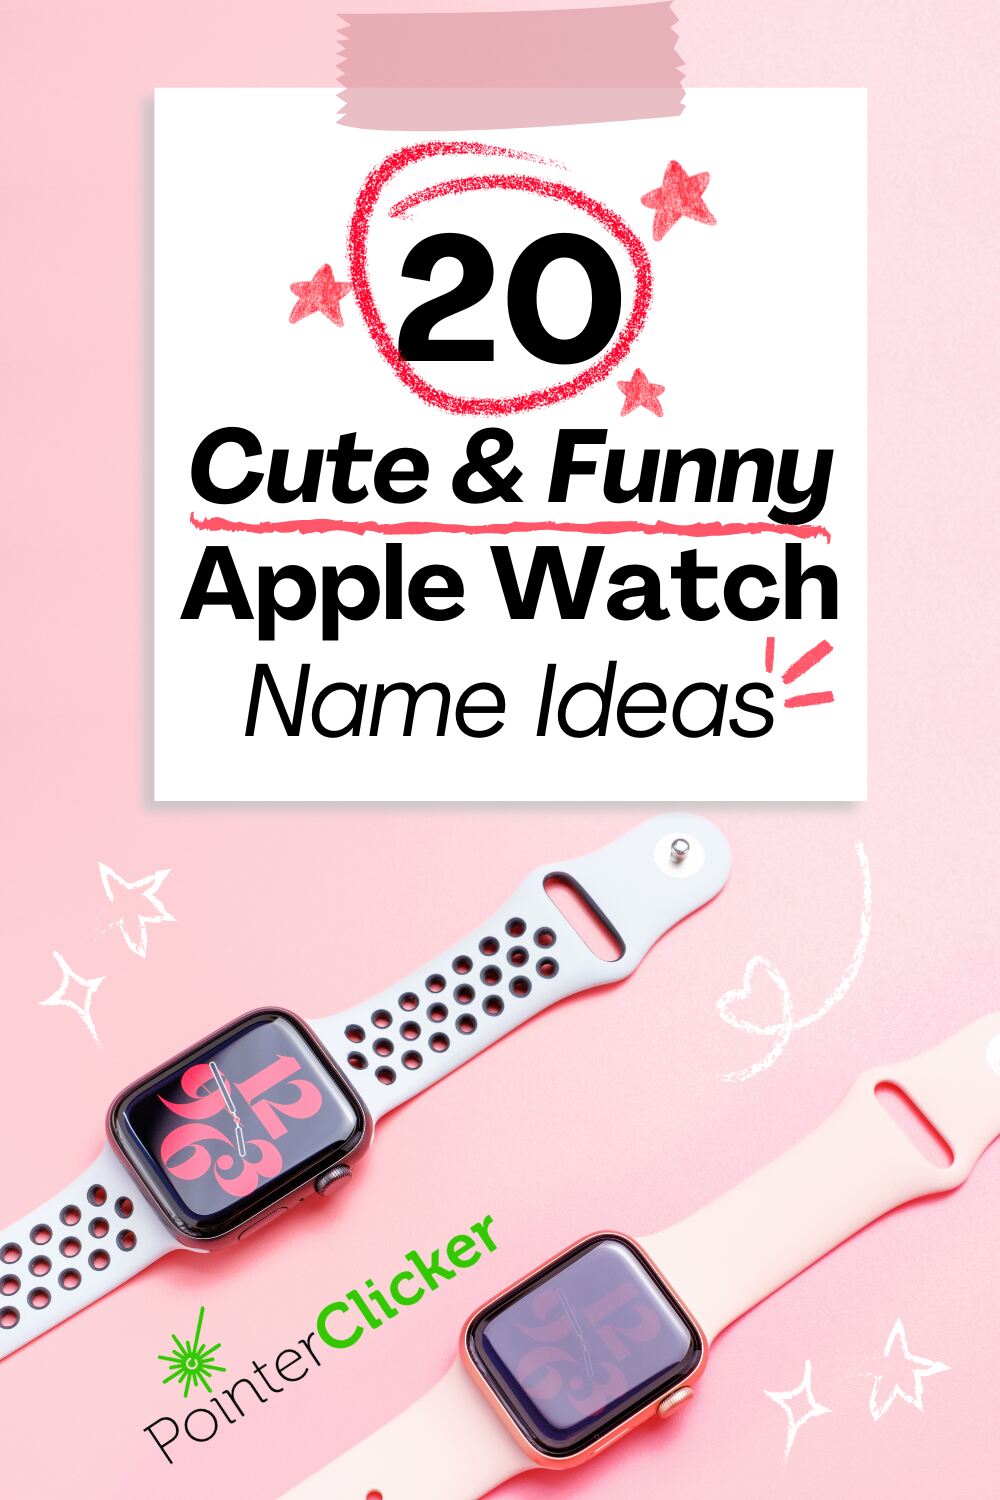 20 Cute & Funny Apple Watch Name Ideas That Will Charm Your Socks Off